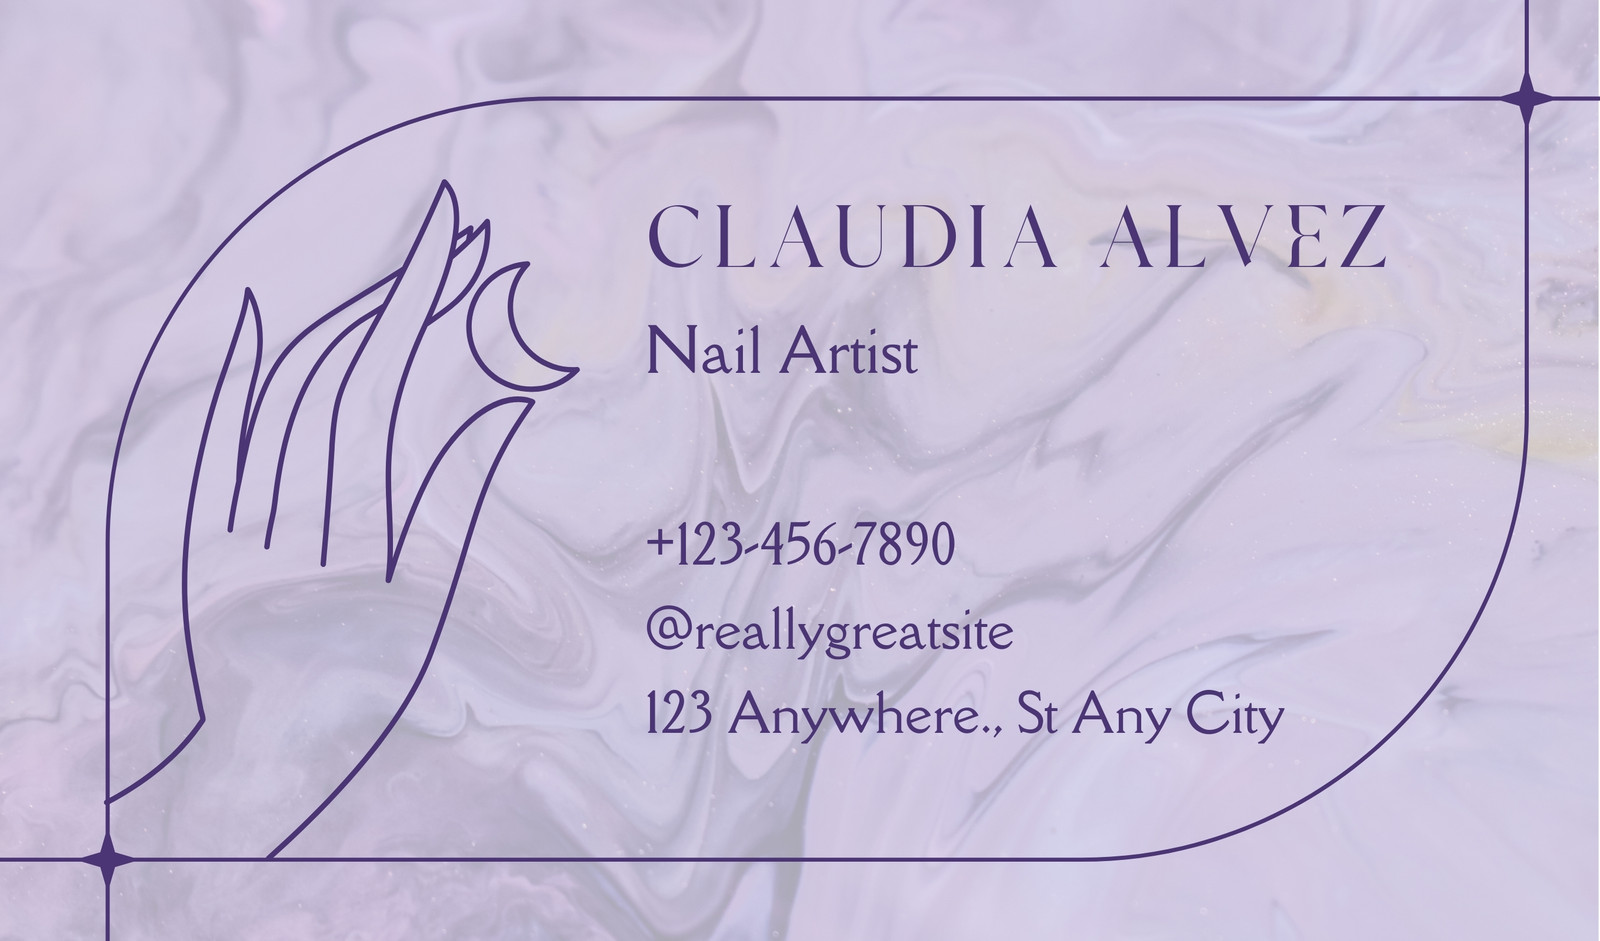 Nail Artist Application Instructions Nail Artist How to Apply Card Nail Artist Personalized Business Cards